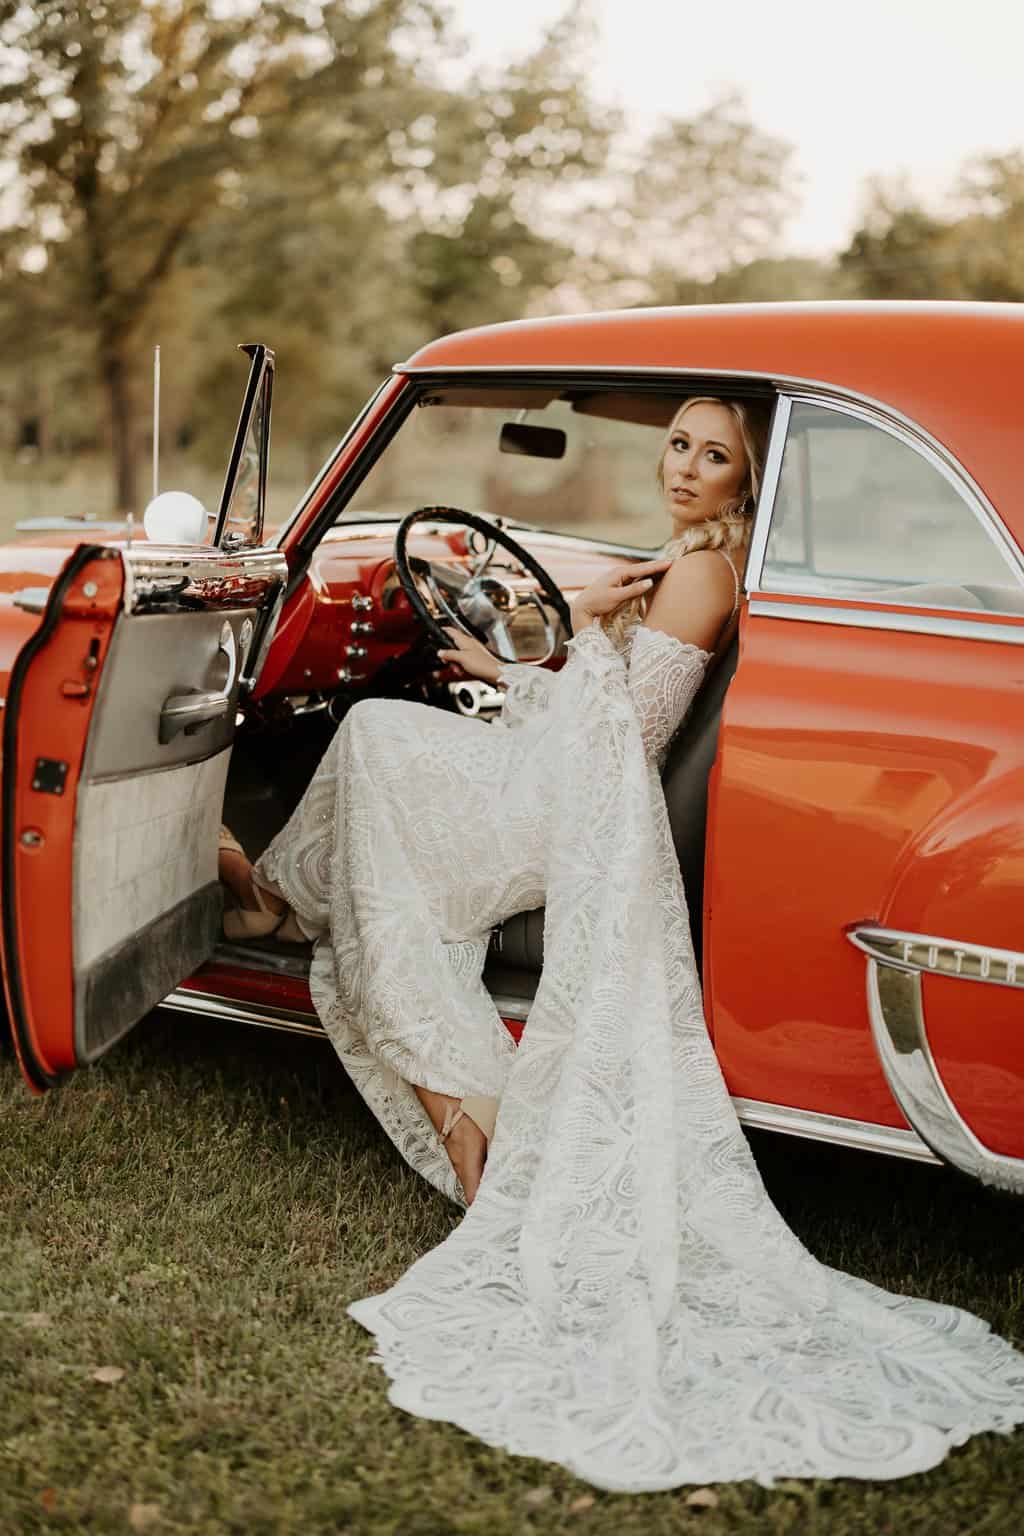 Free A Woman in Her Wedding Dress Sitting in a Vintage Car Stock Photo